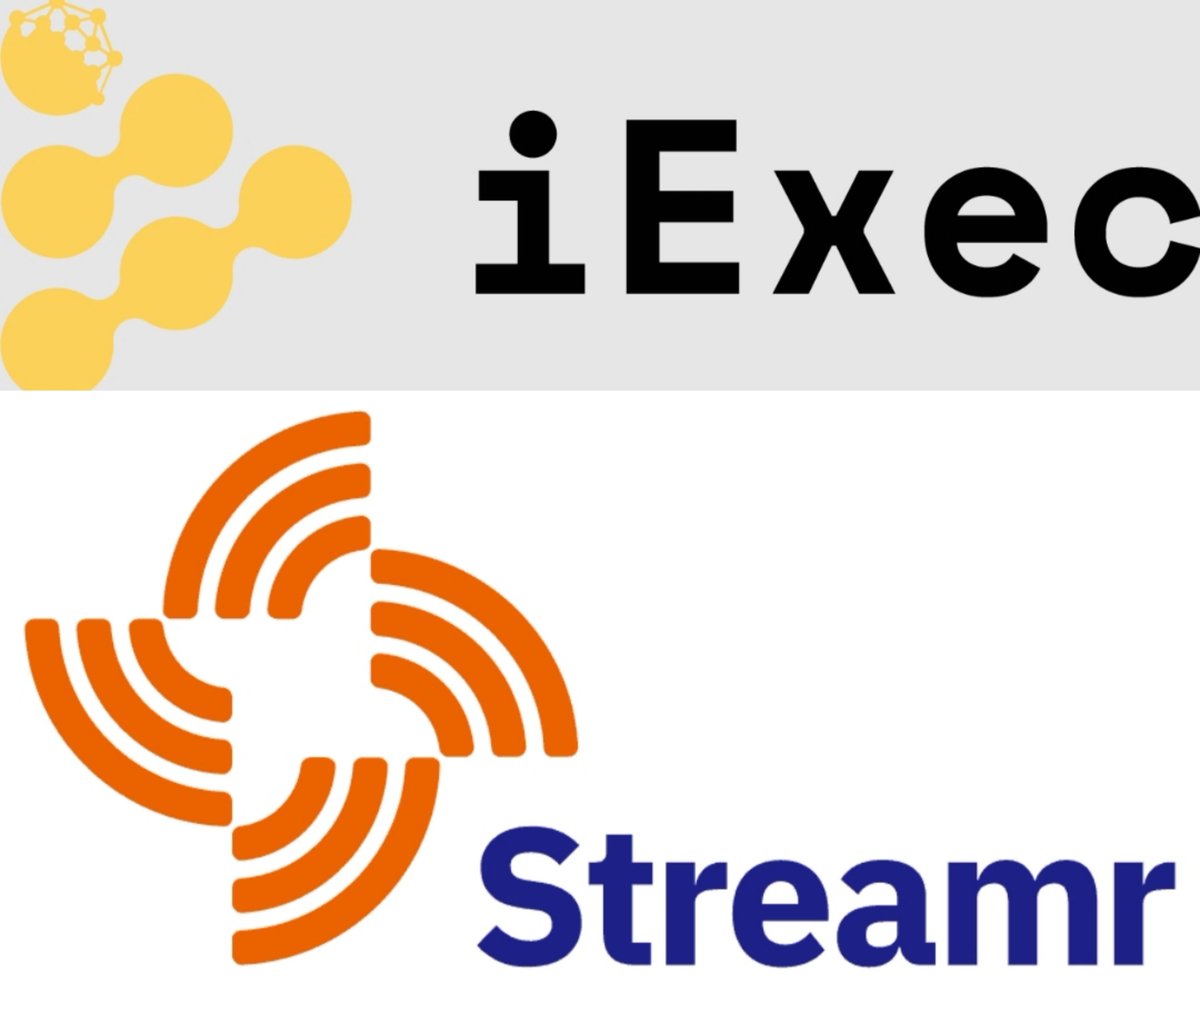 Invested today in @iEx_ec $RLC and $DATA  @streamr

Both are data availability projects that support the #AI narrative projects.

doxxed teams, great circulation, working for few years already, getting steady progress, medium to low MC.

I'll try to explain more on each later